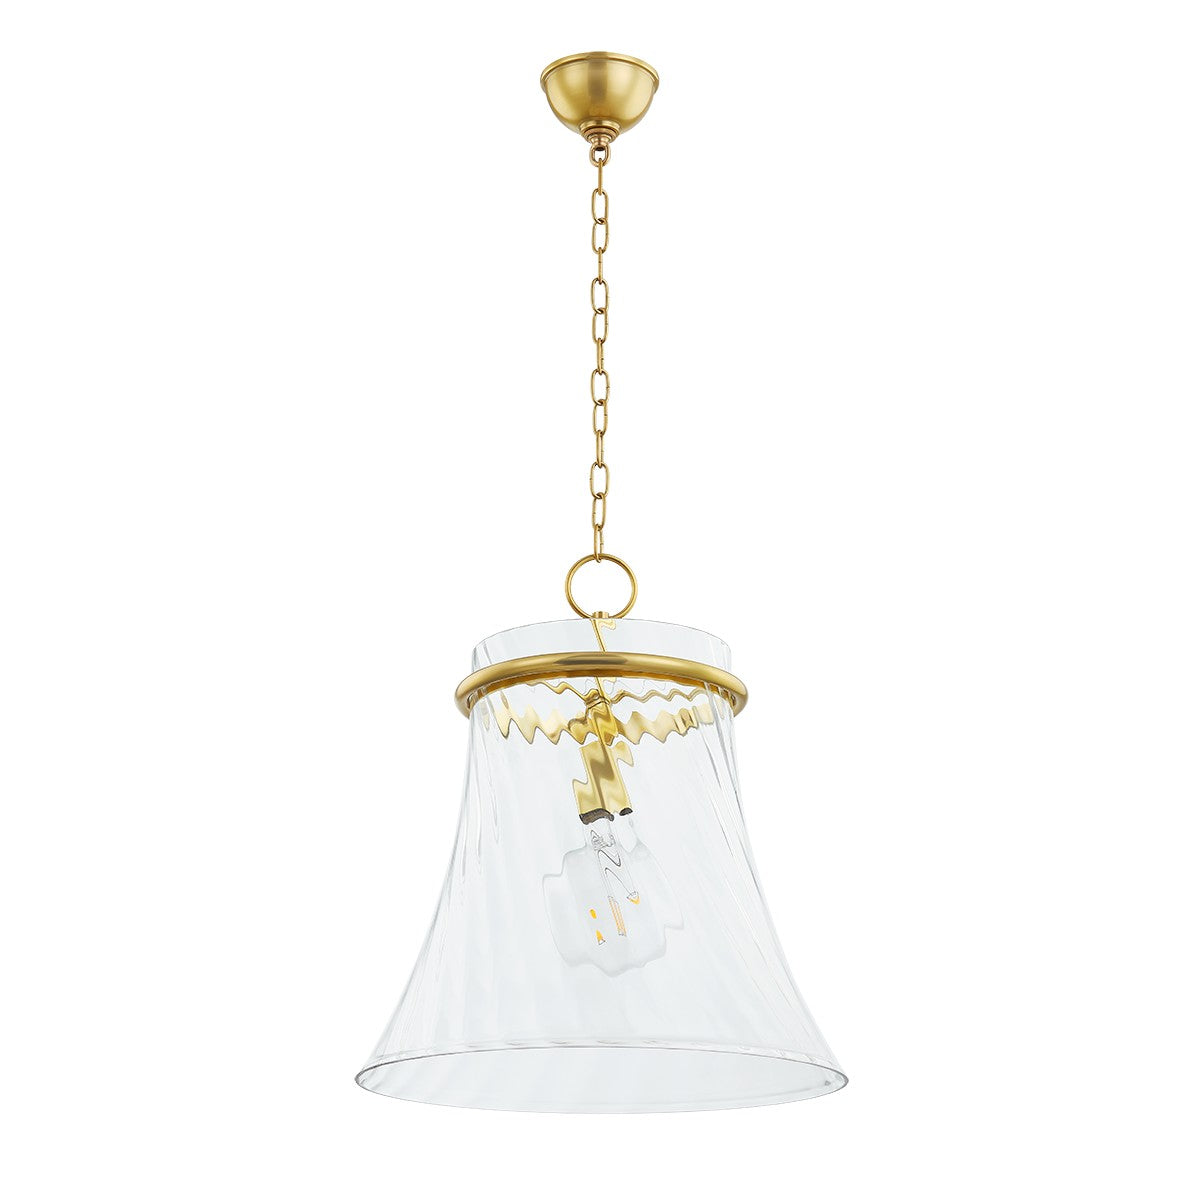 Mitzi - H824701L-AGB - One Light Pendant - Cantana - Aged Brass